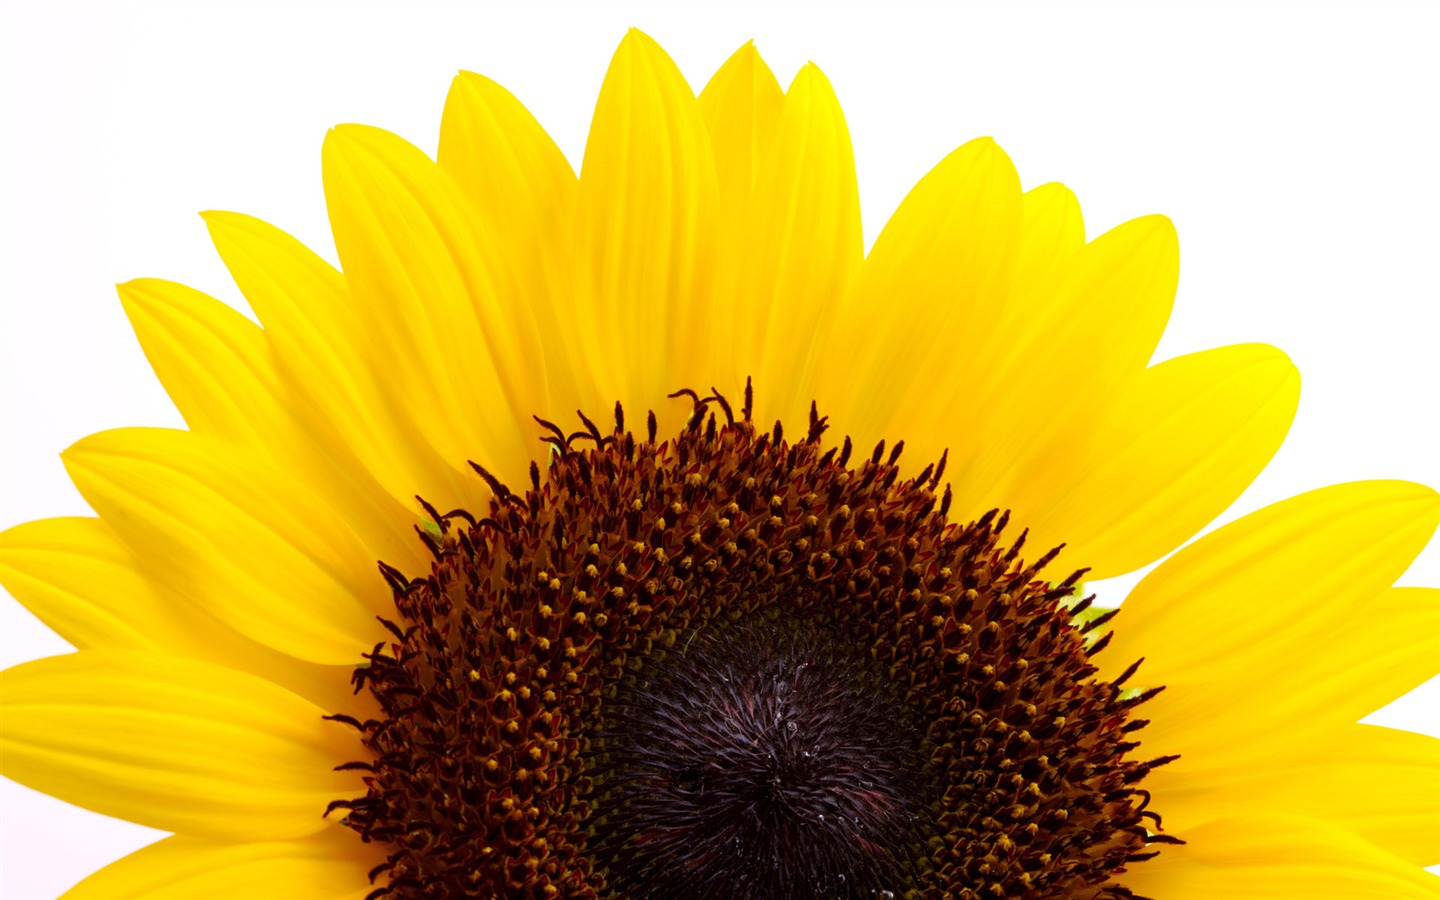 Sunny sunflower photo HD Wallpapers #18 - 1440x900